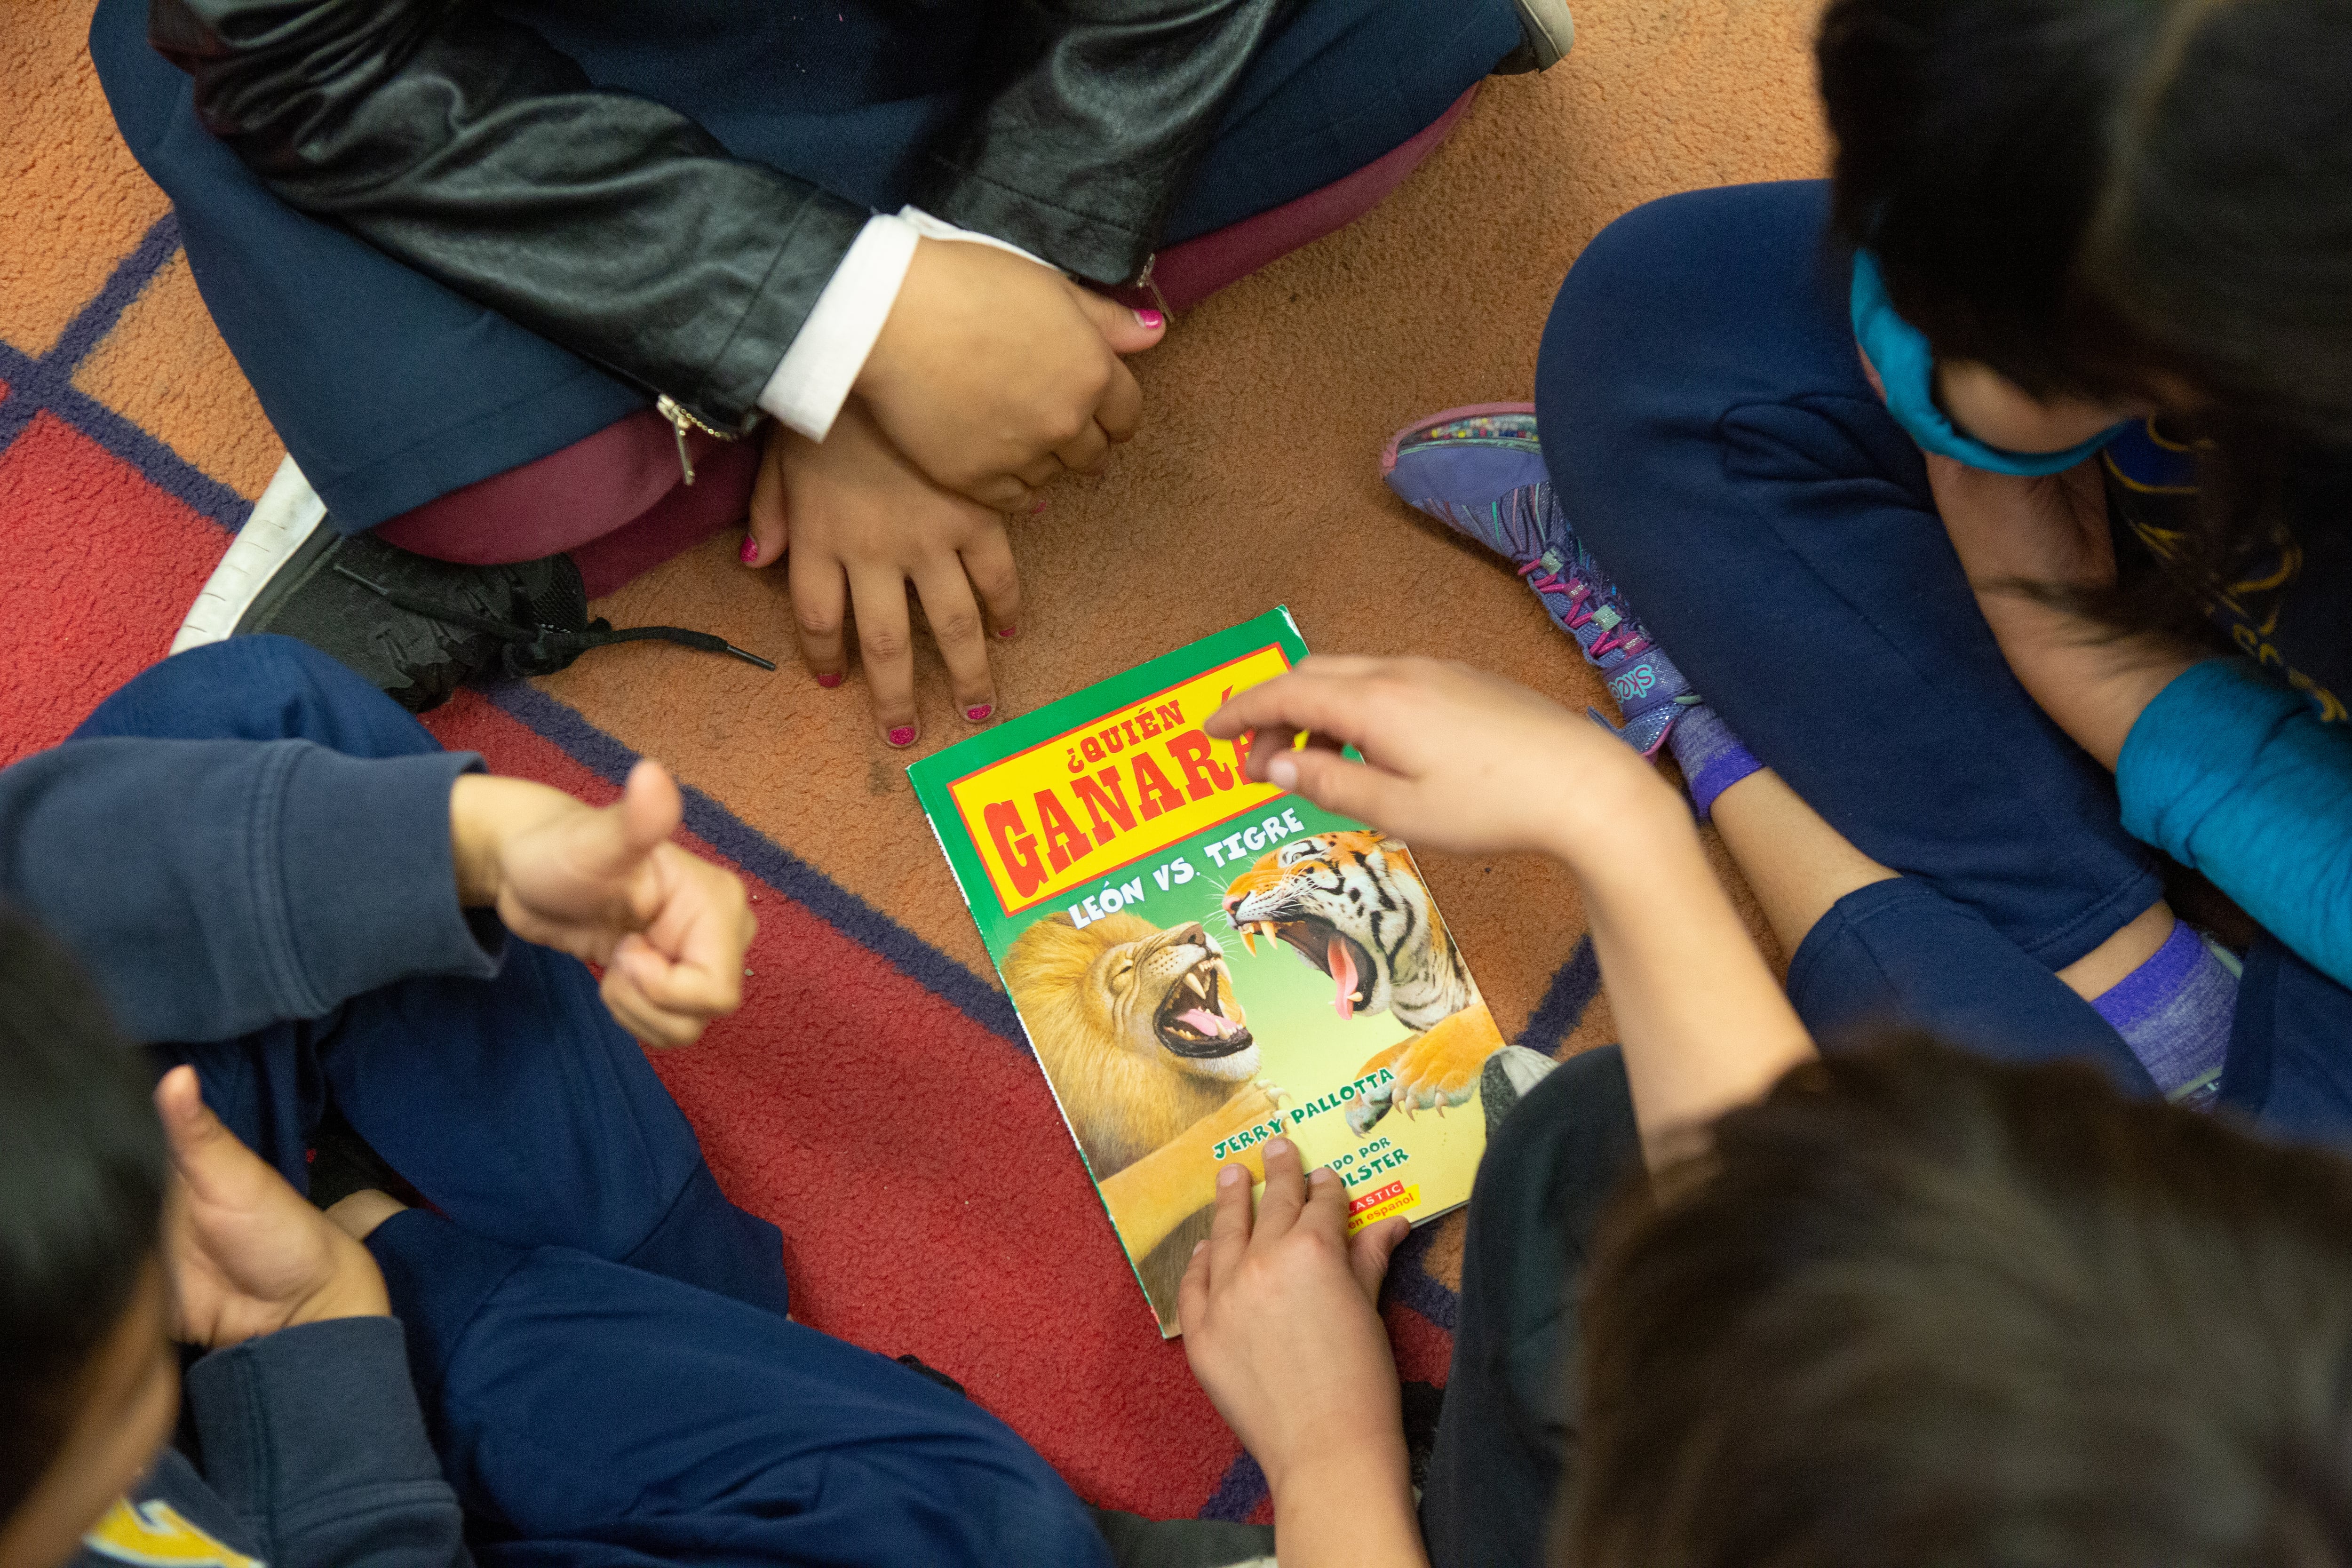 A view looking down at a group of four students sitting on the floor in a circle as one of the students holds a book titled, “Quién Ganará?” with a picture of a lion and tiger showing their teeth. Another student holds a thumbs-up pose.